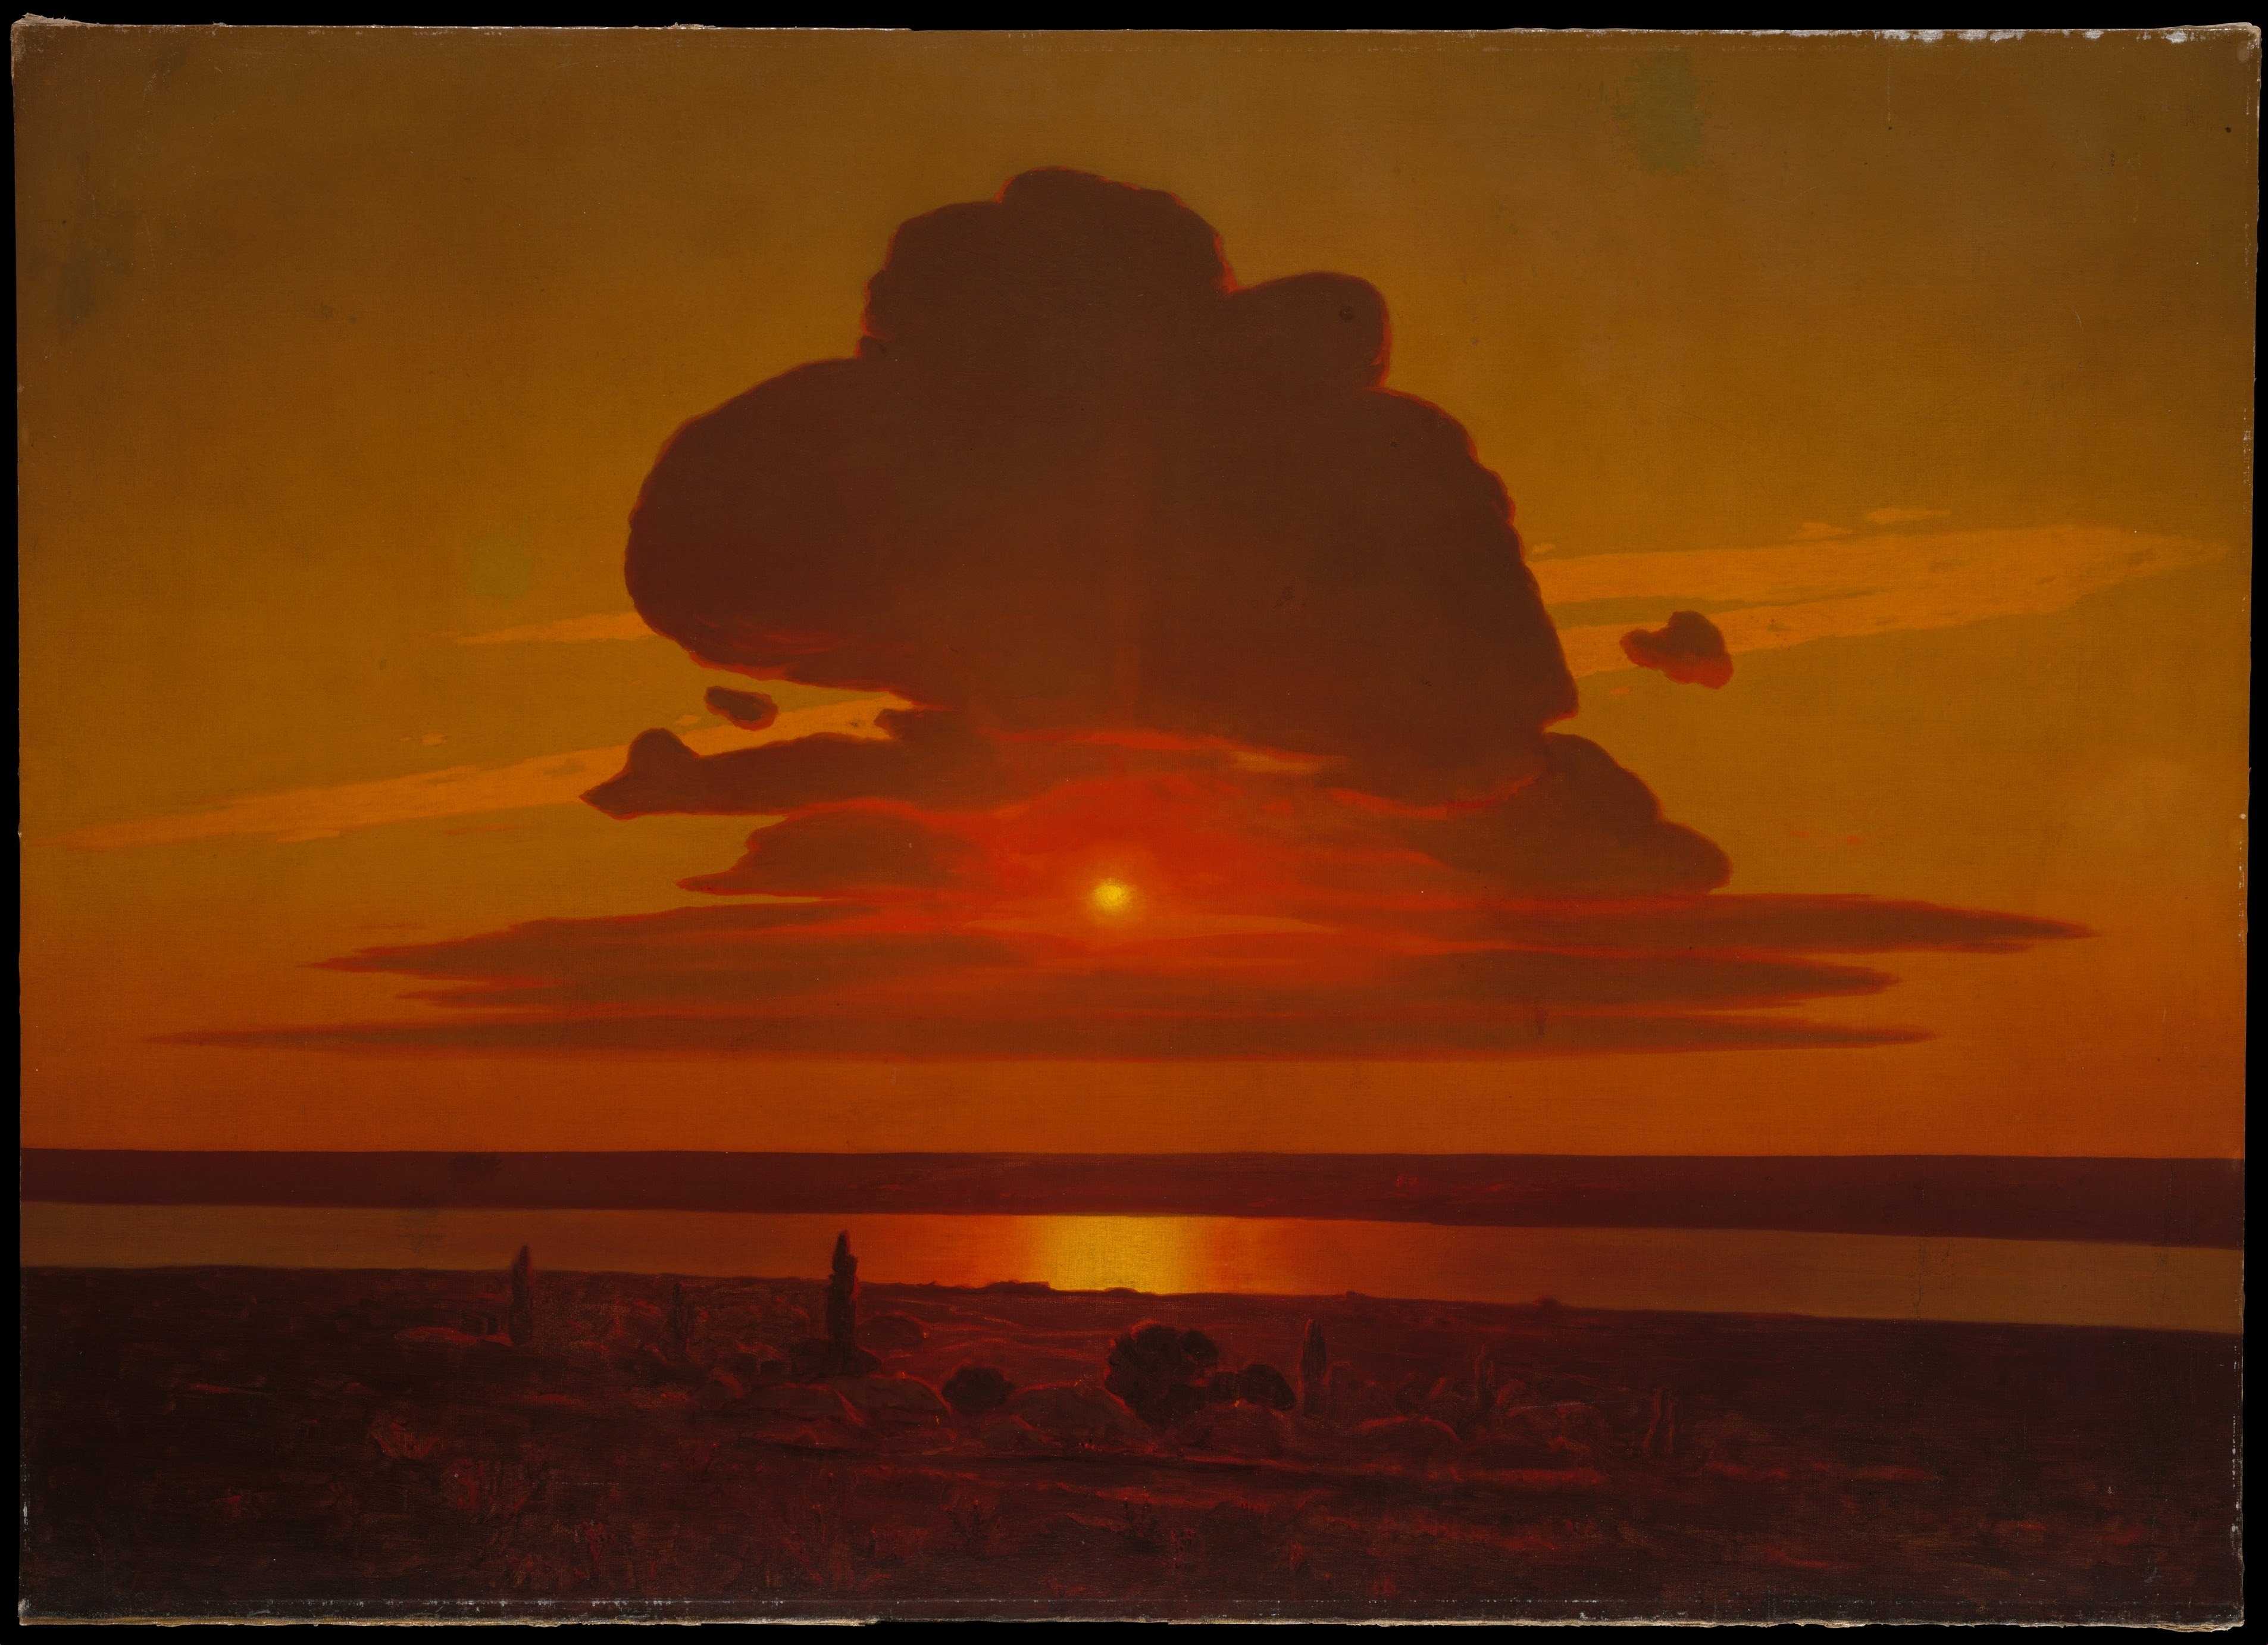 Find out more about Arkhip Kuindzhi - Red Sunset on the Dnieper